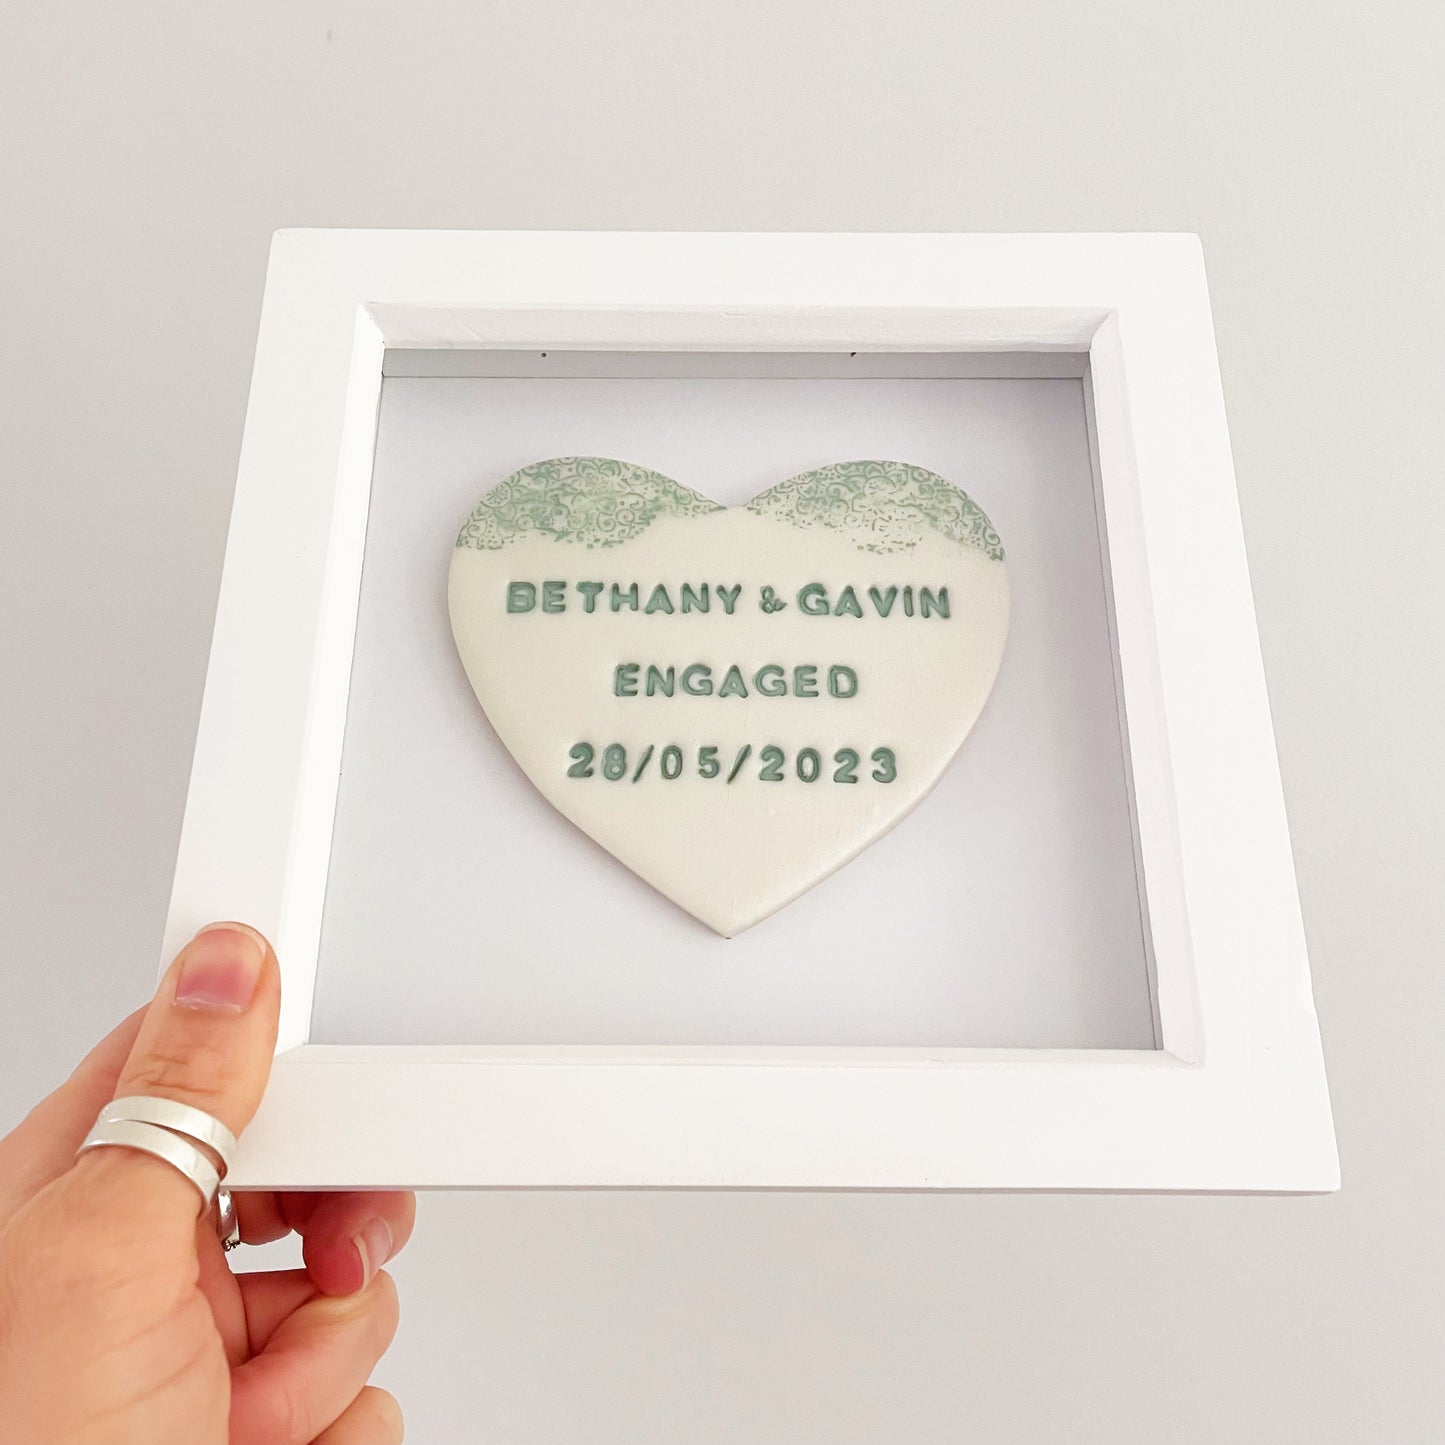 Personalised framed engagement gift, pearlised white clay heart with a white lace edge at the top of the heart in a white box frame, the heart is personalised with BETHANY & GAVIN ENGAGED 28/05/2023